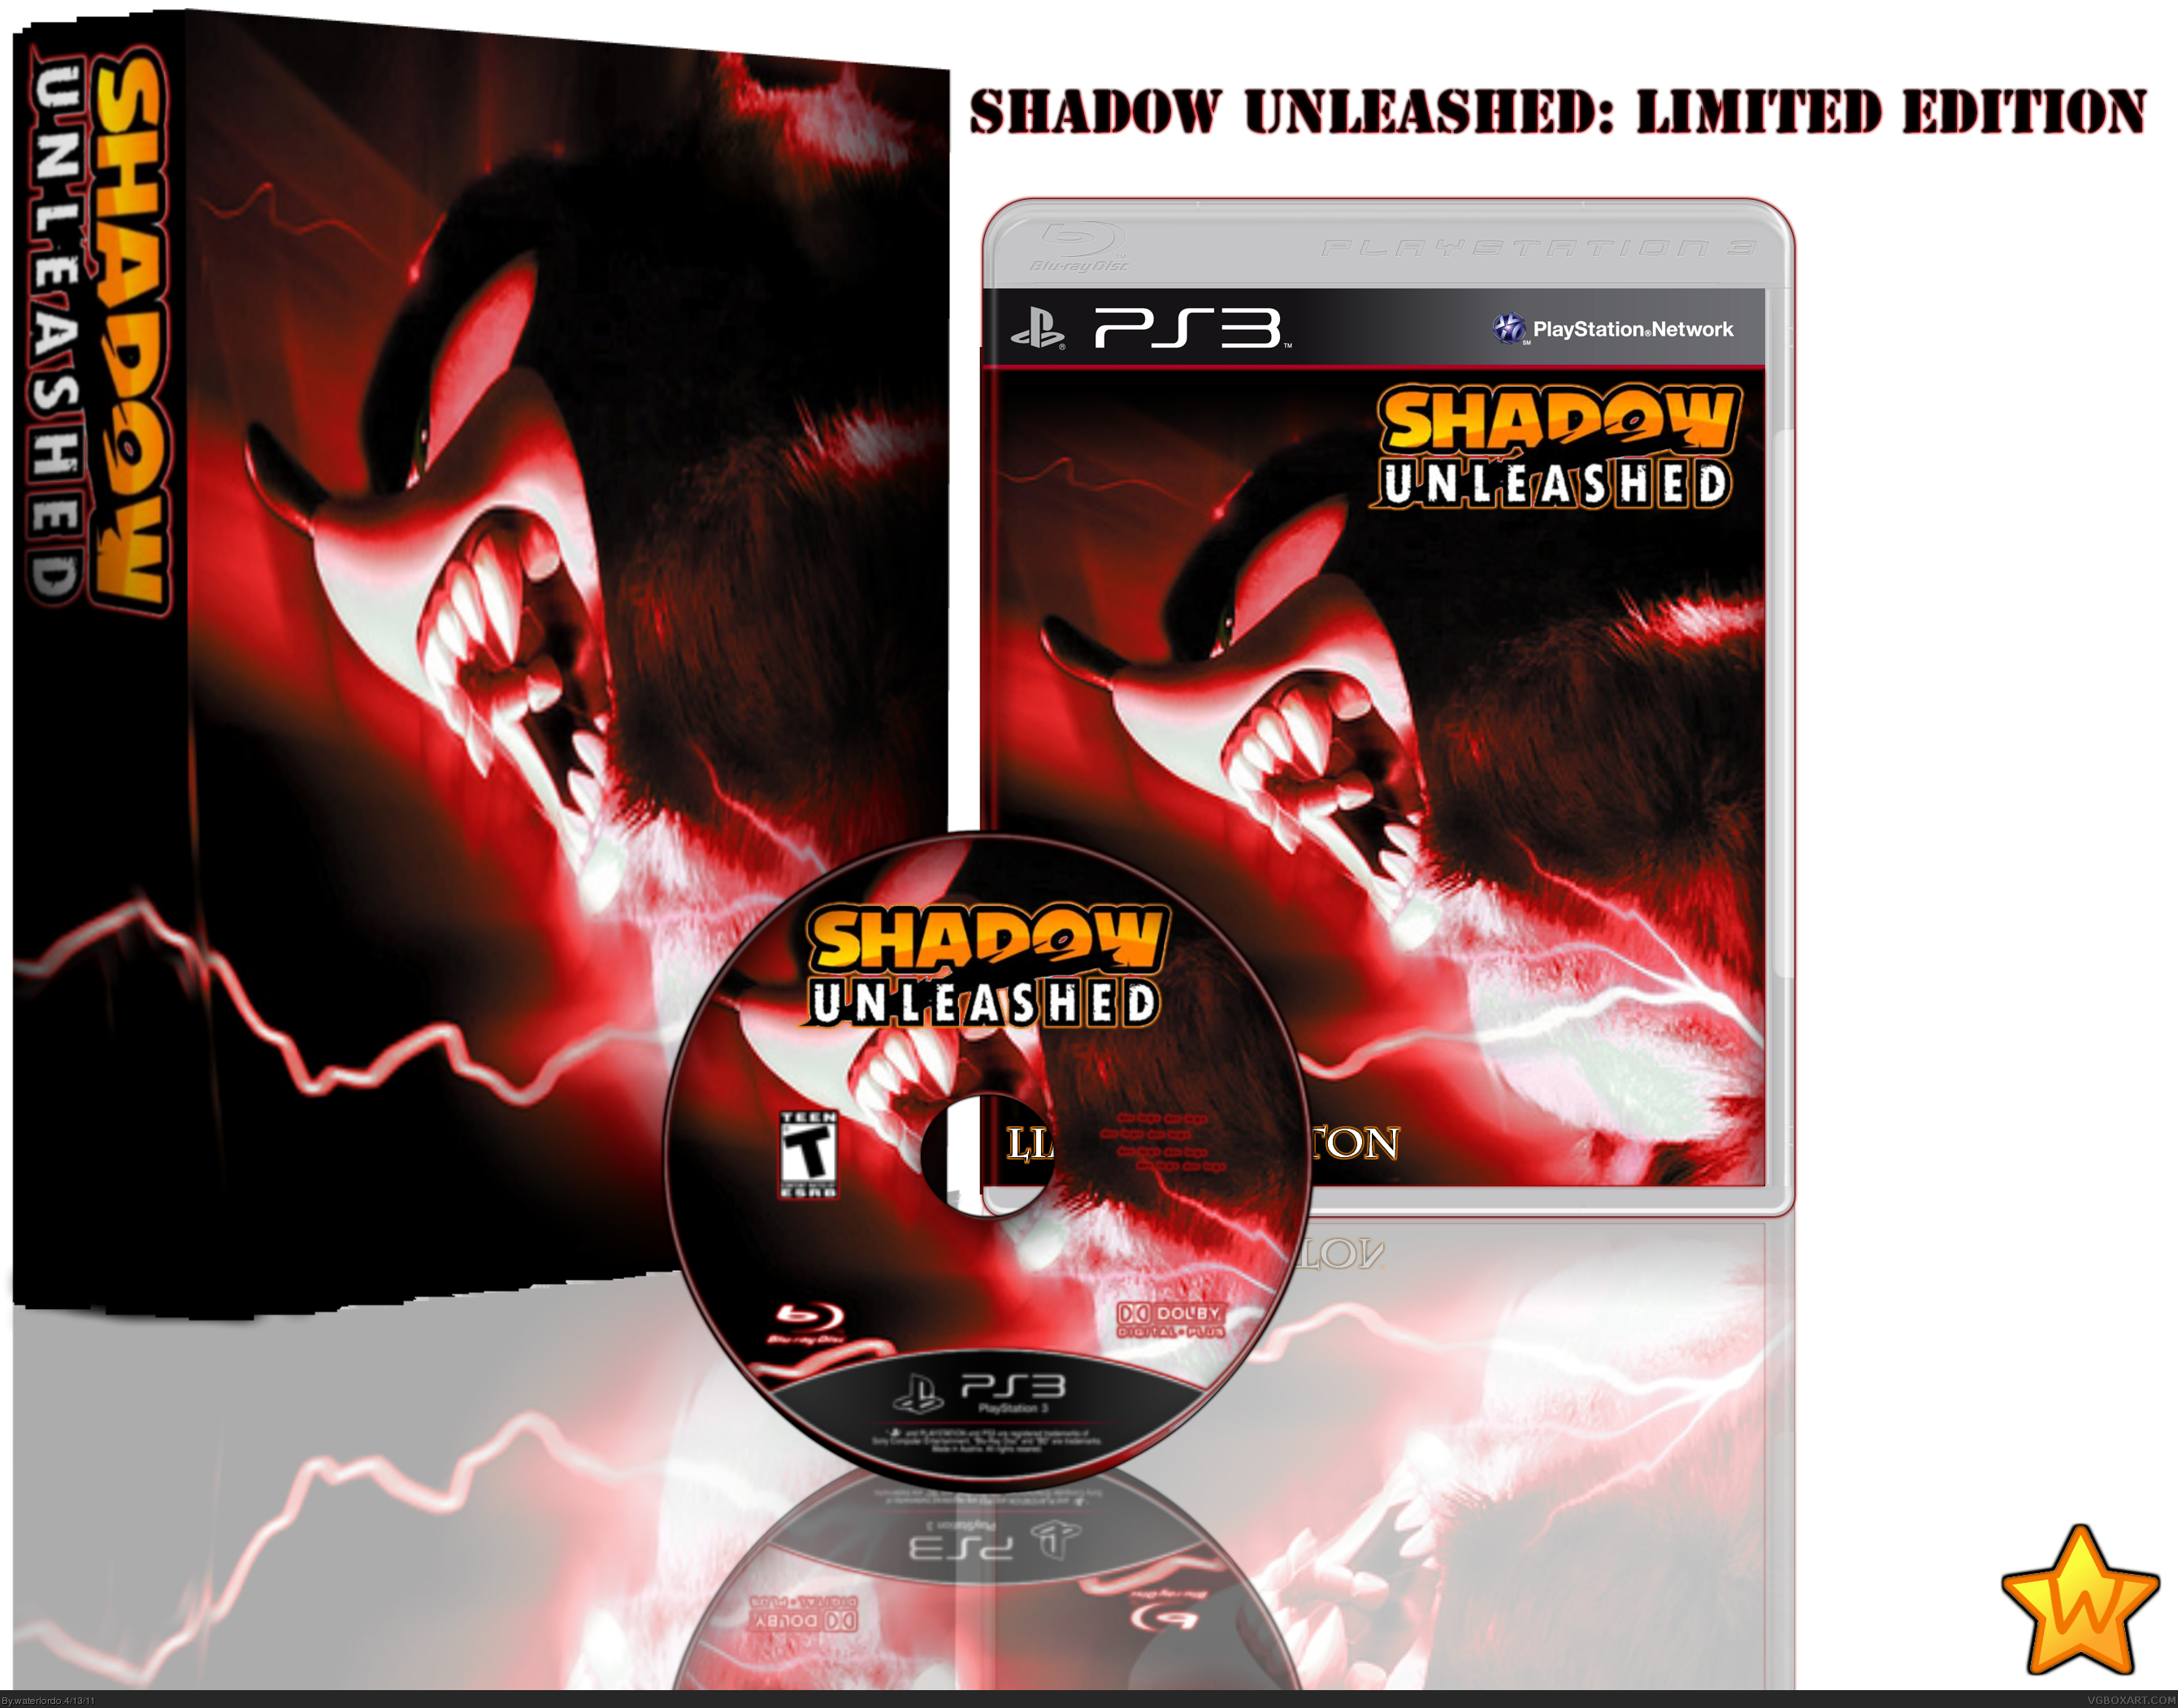 Shadow Unleashed: Limited Edition box cover